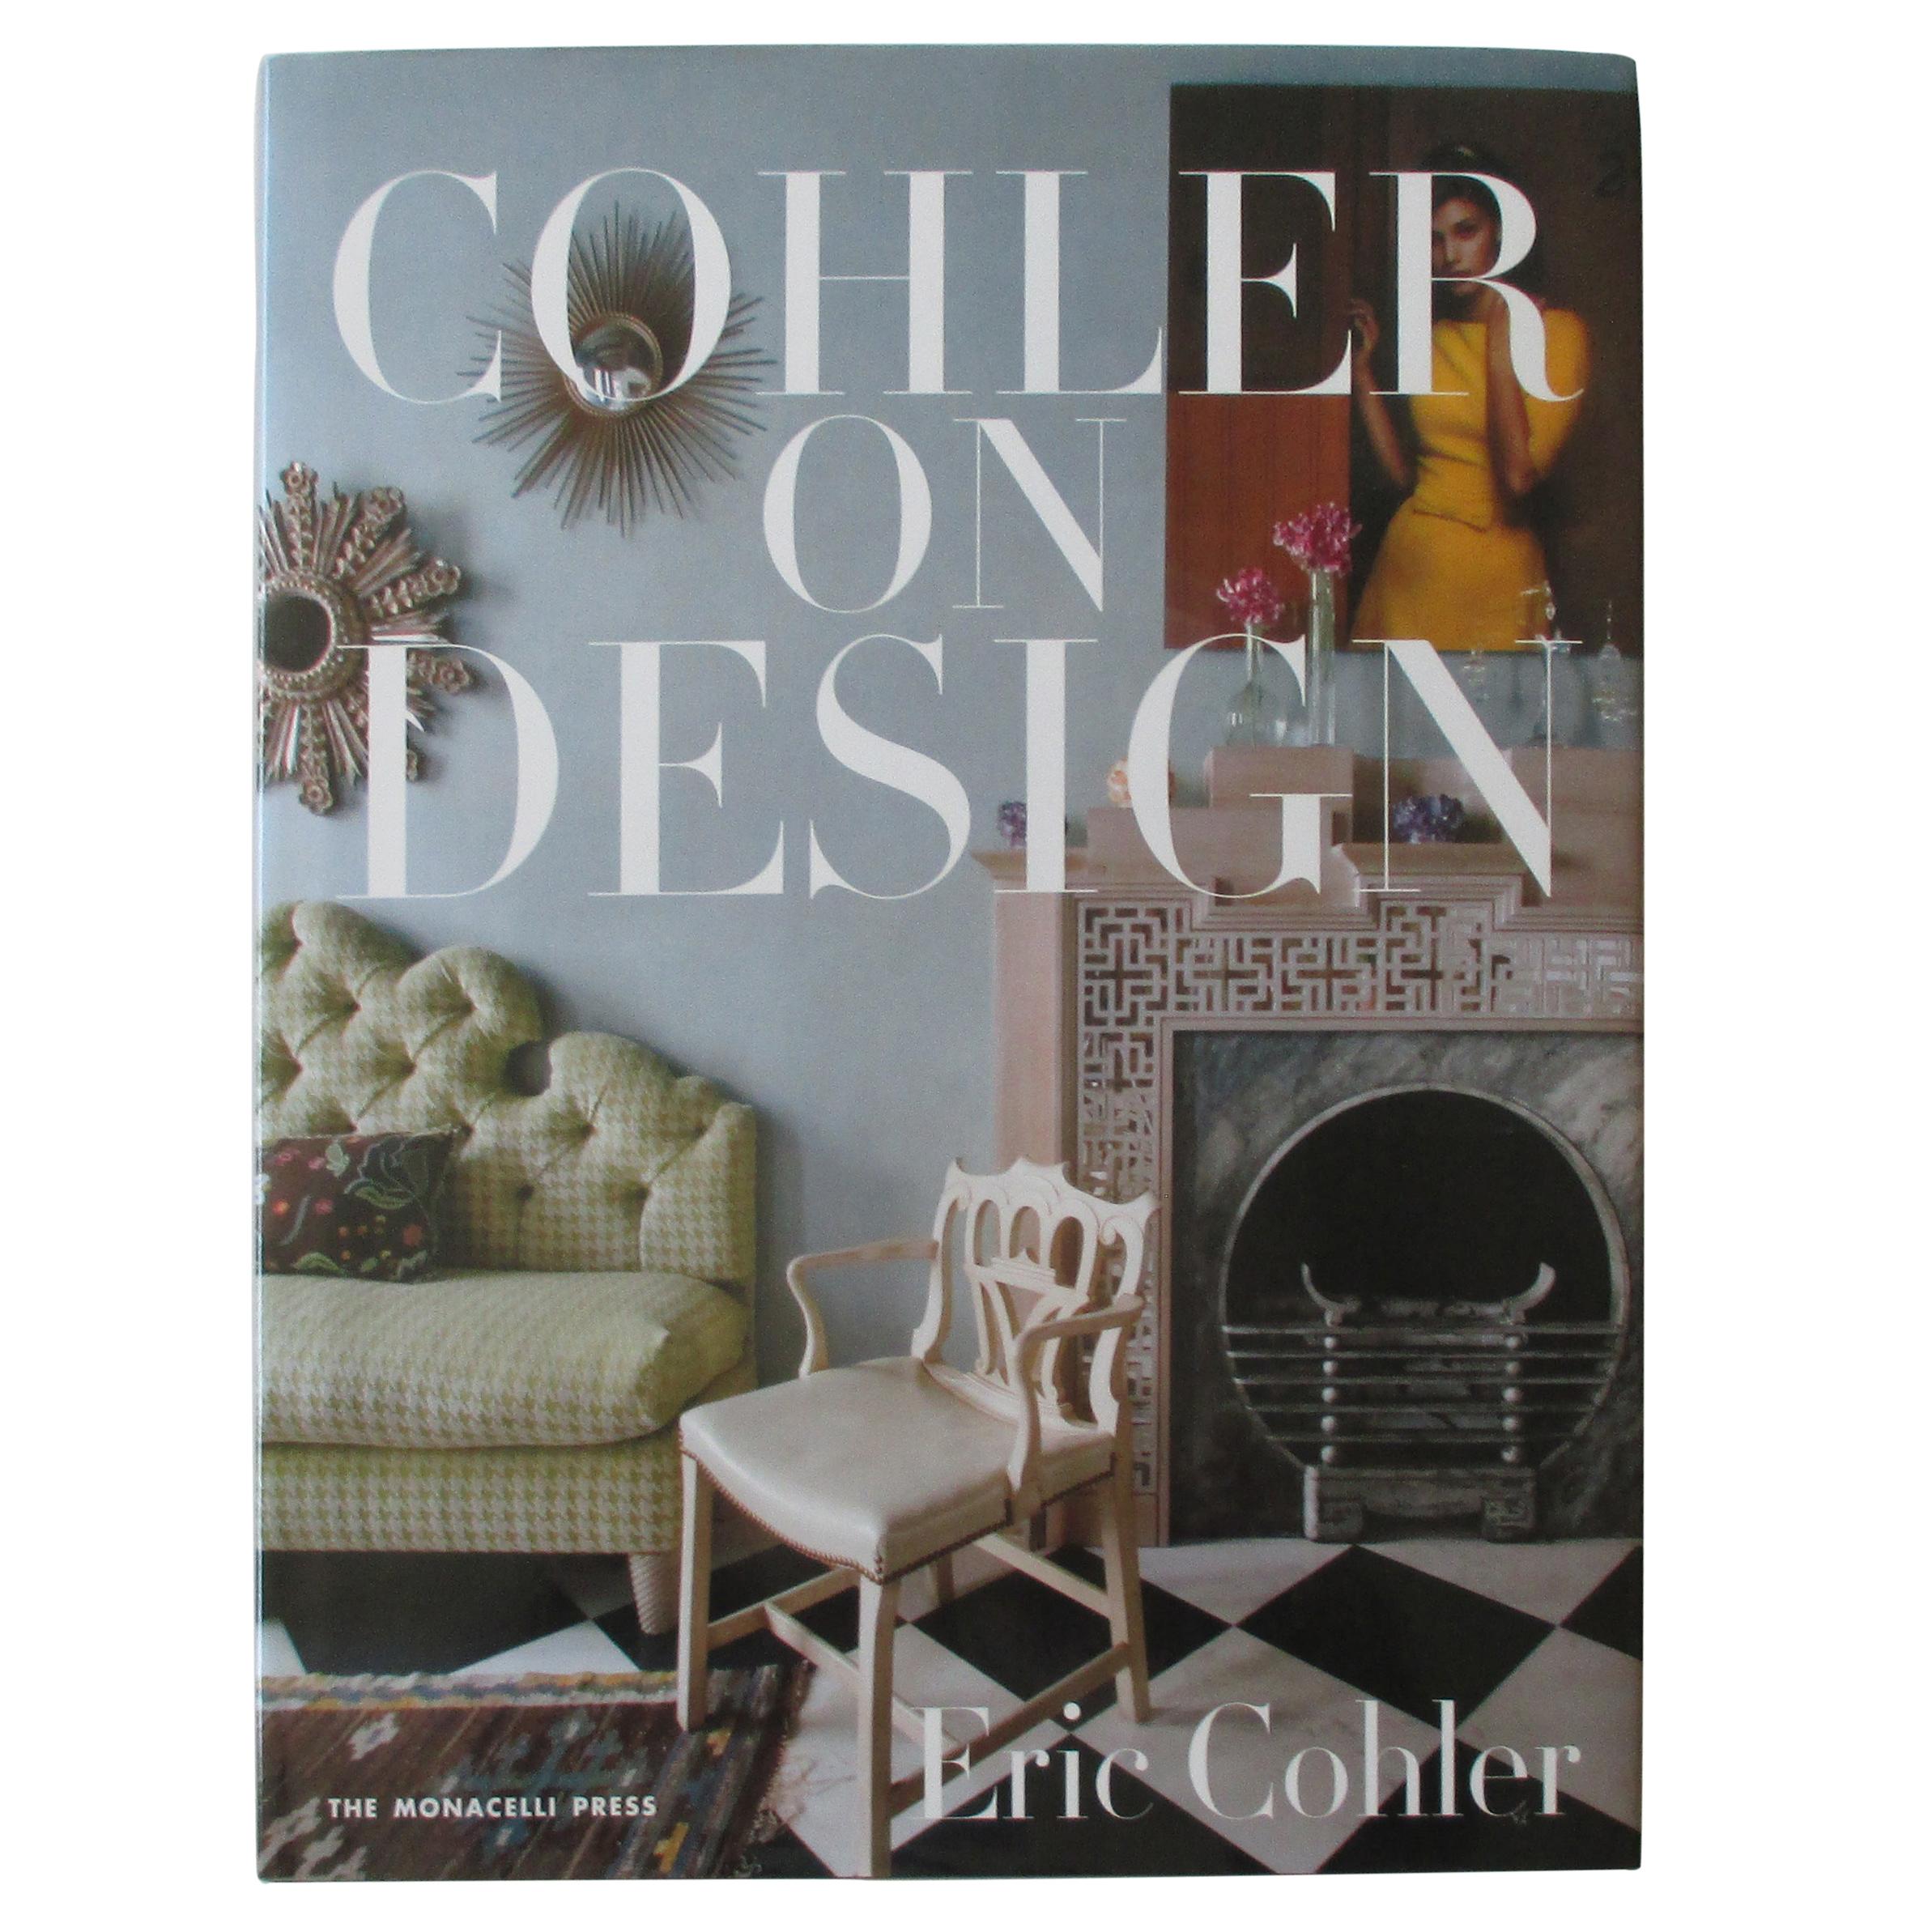 "Cohler on Design" Hard Cover Coffee Table Book